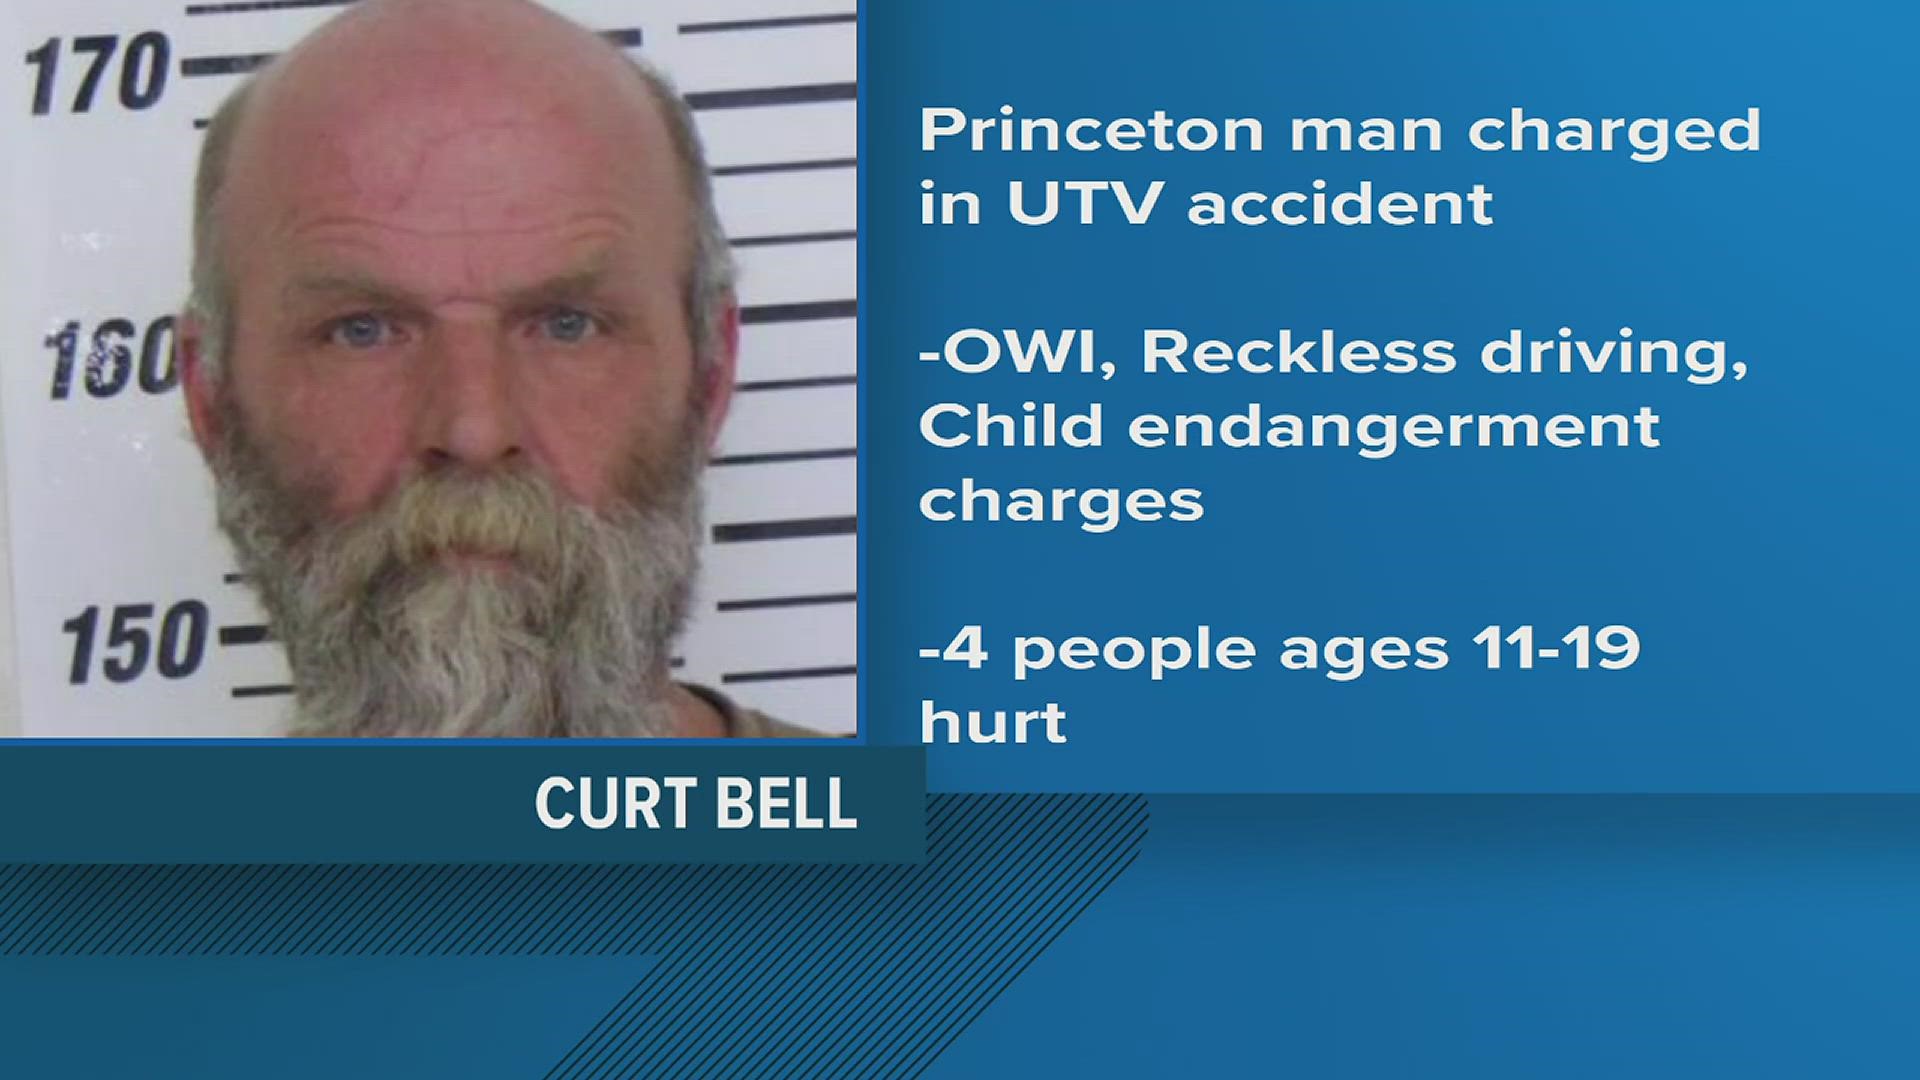 The man faces charges of child endangerment, drunk driving and more after he lost control of a UTV and crashed into a fence, injuring the teenage passengers.